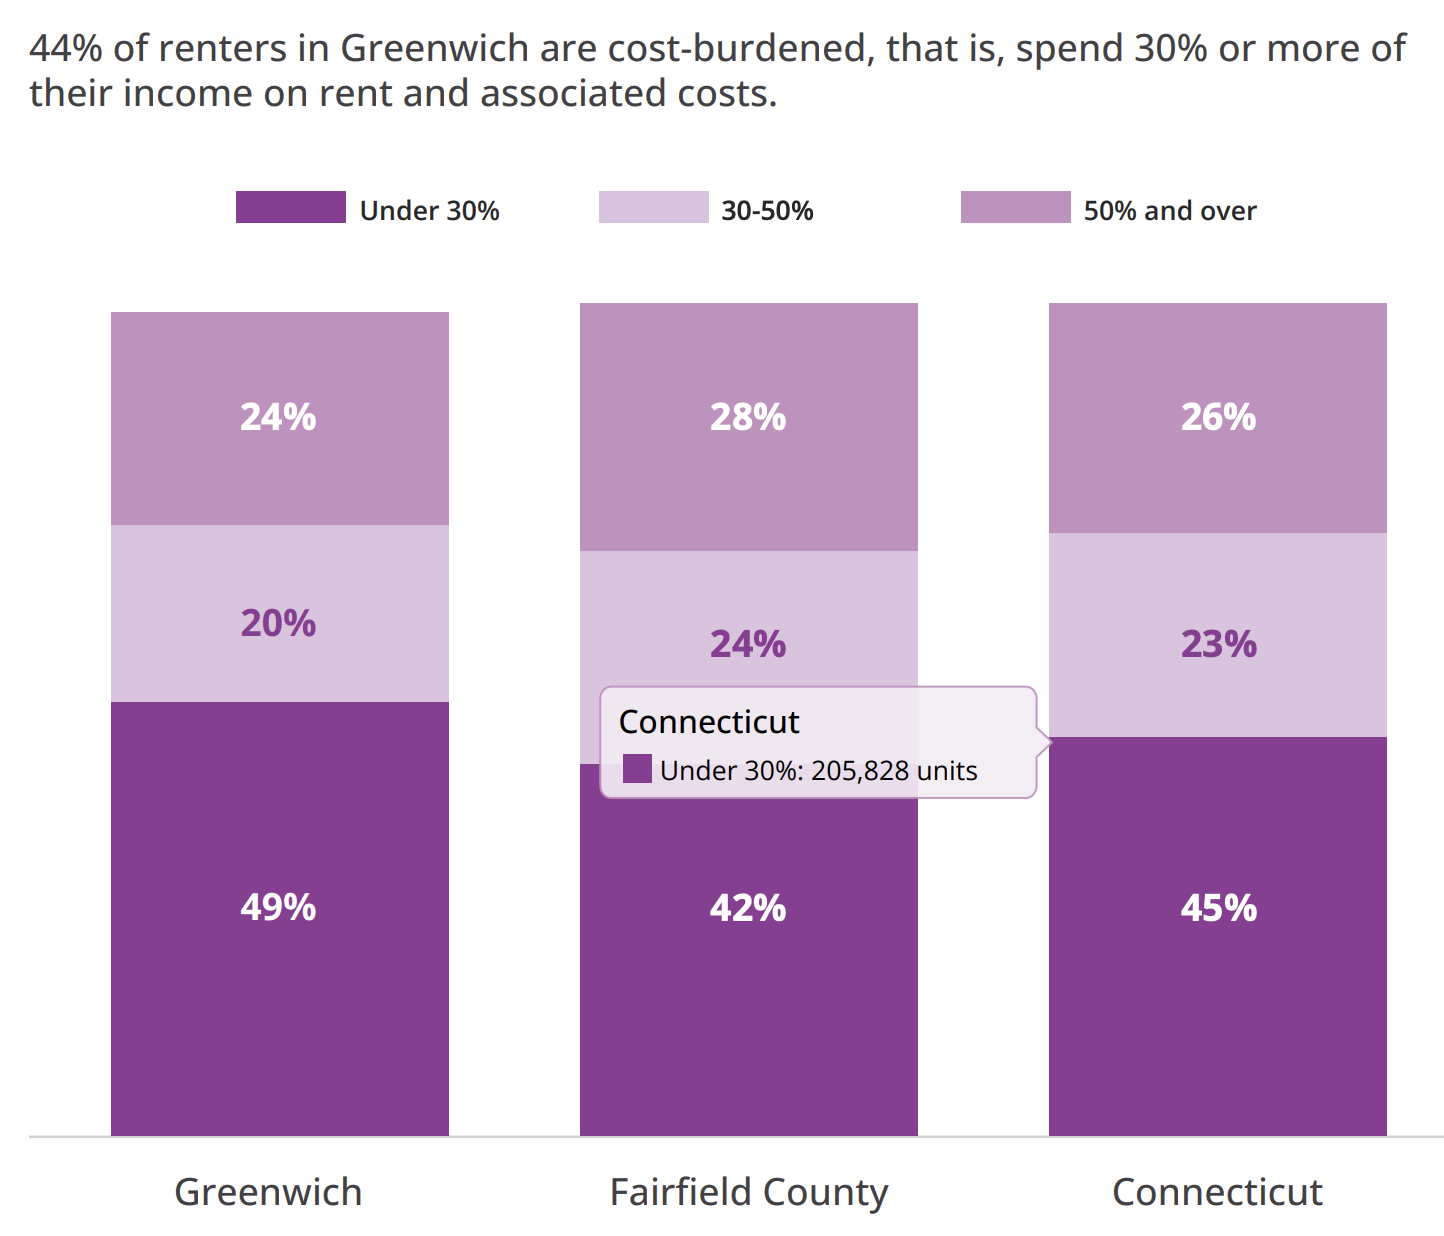 Chart shows cost burdened renters in Greenwich, Fairfield County, and Connecticut